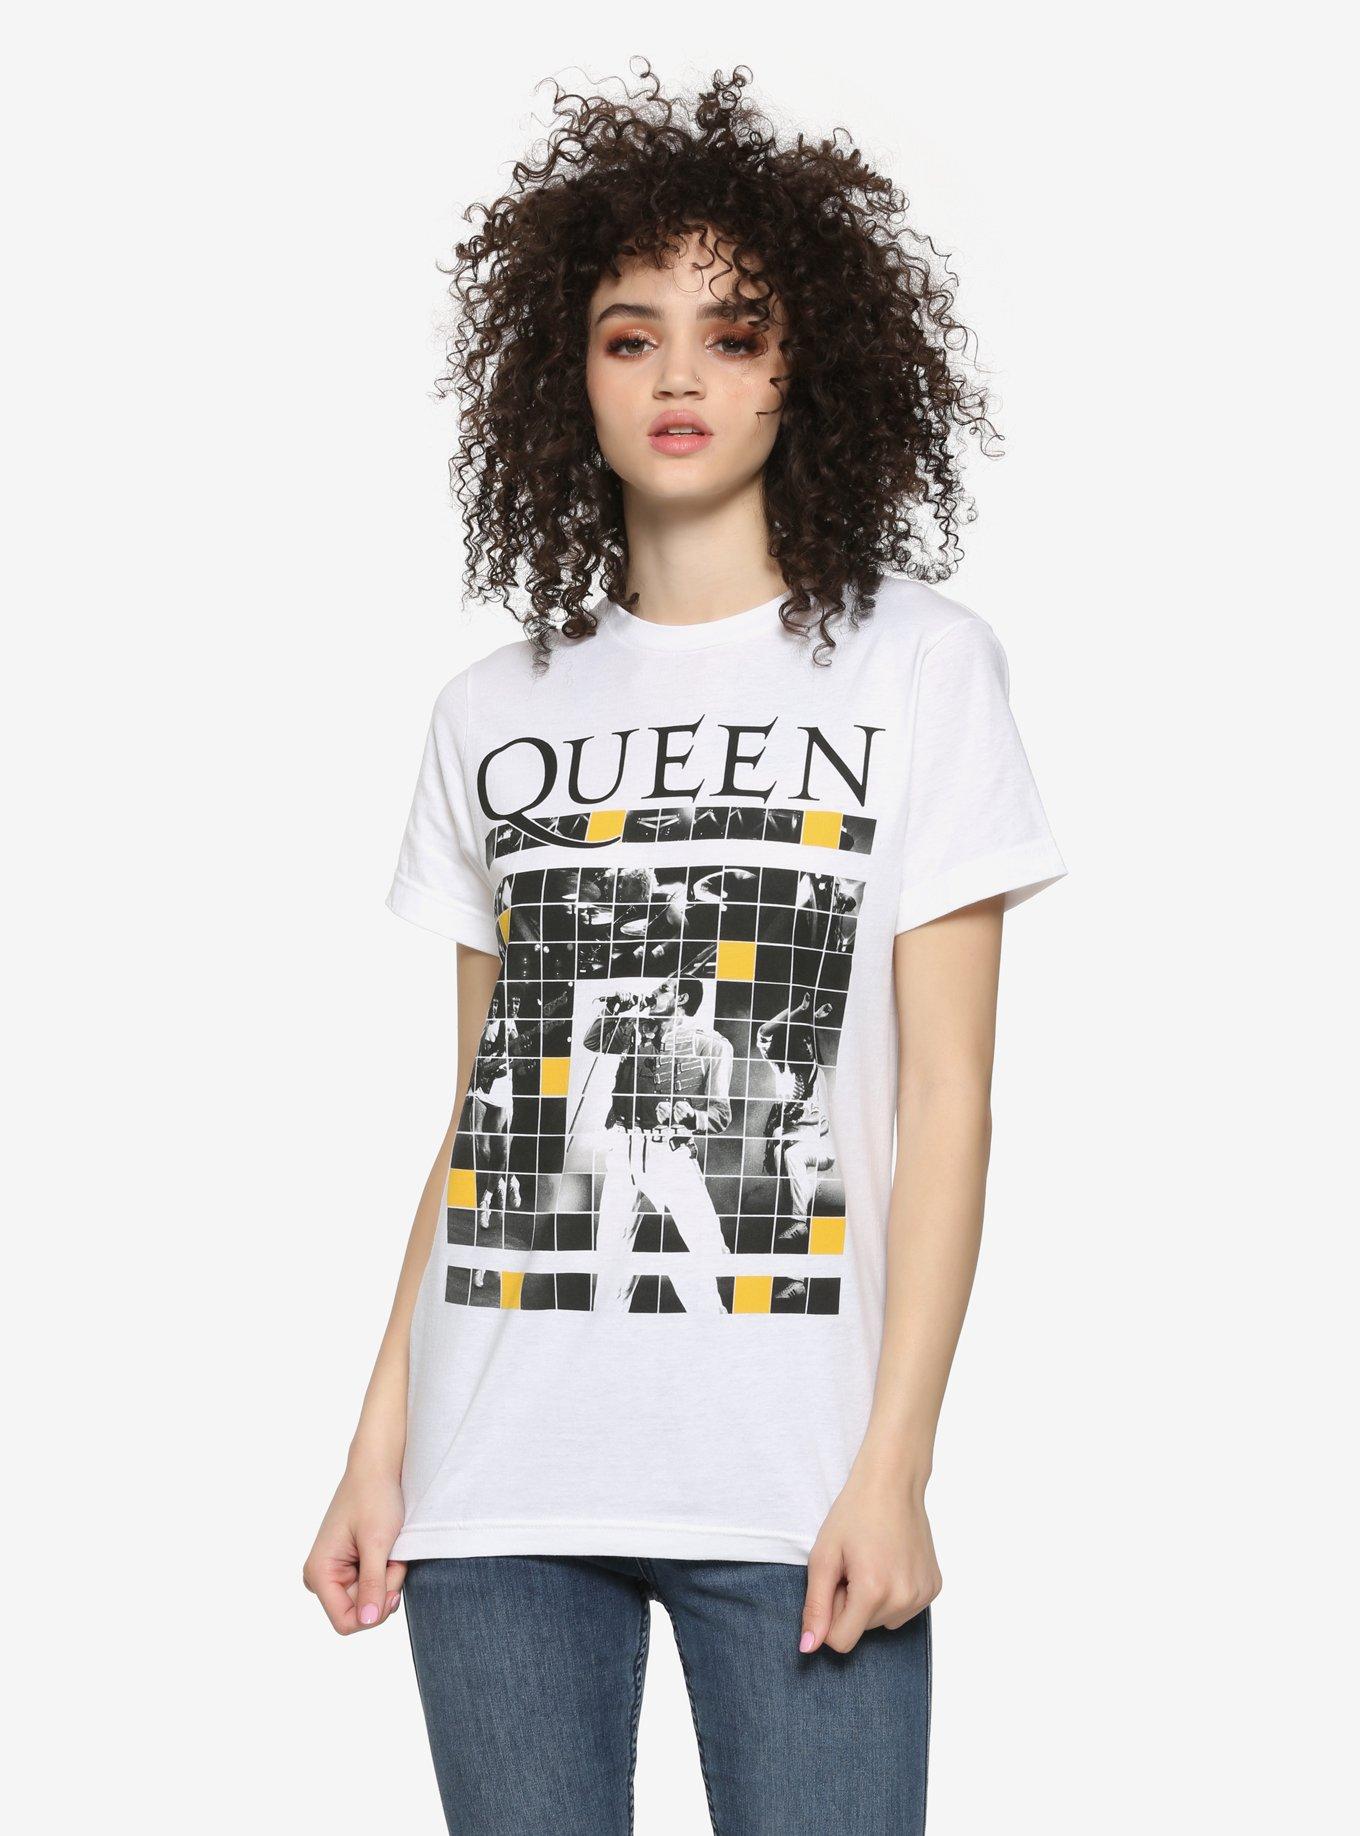 Queen Squares Girls T-Shirt, WHITE, hi-res